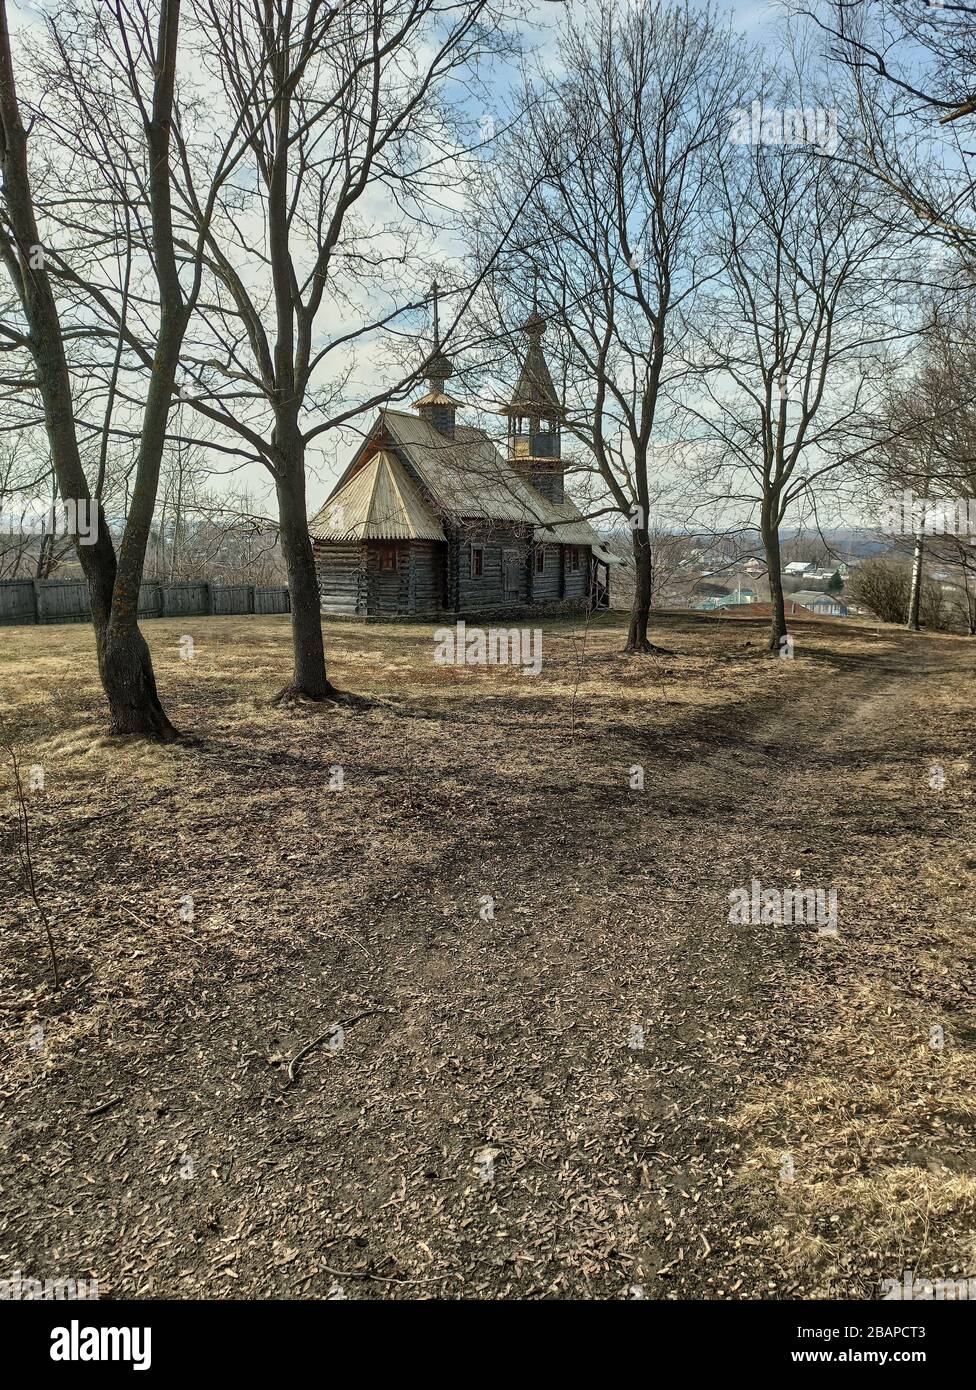 Ancient orthodox temple among trees. Landscape of central Russia. Windows, roof and doors are visible through branches. The village of Big Boldino Stock Photo